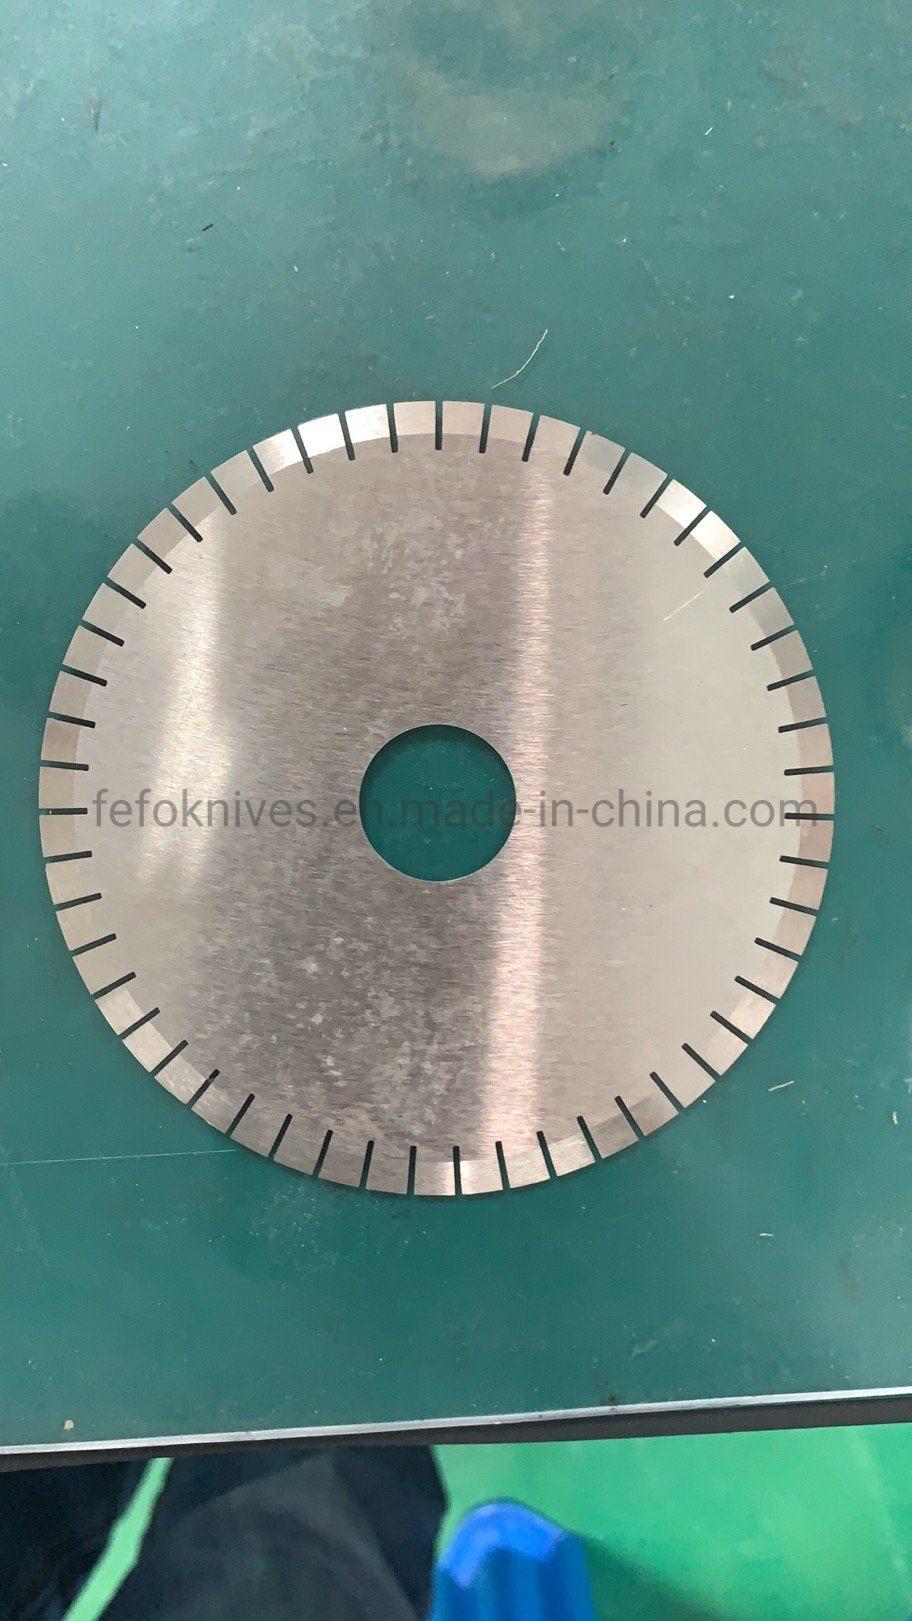 Replacement Blade and Knives for Slitting Machine